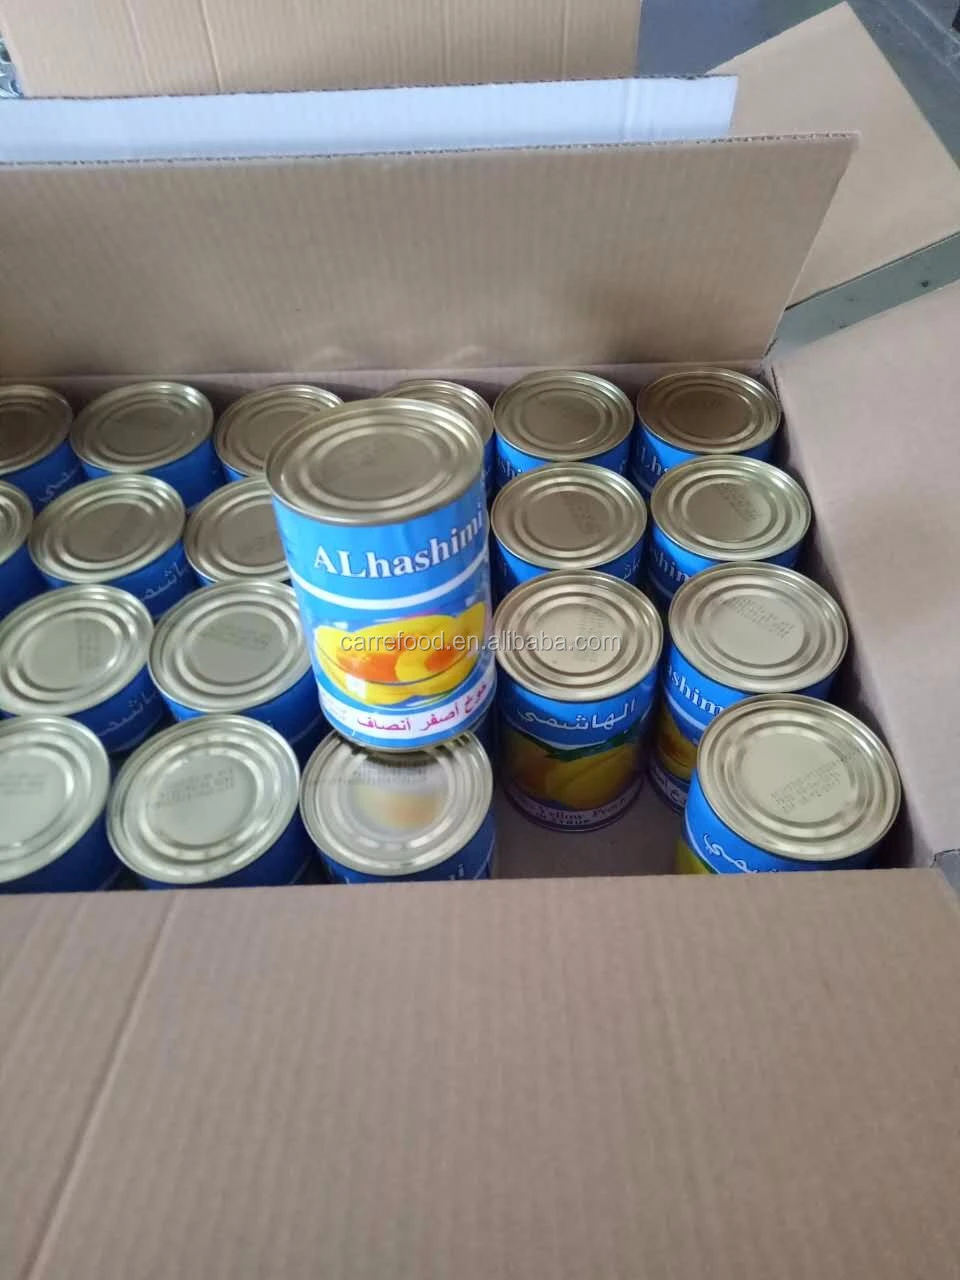 Canned fruit supplier/canned peaches usa/canned food list